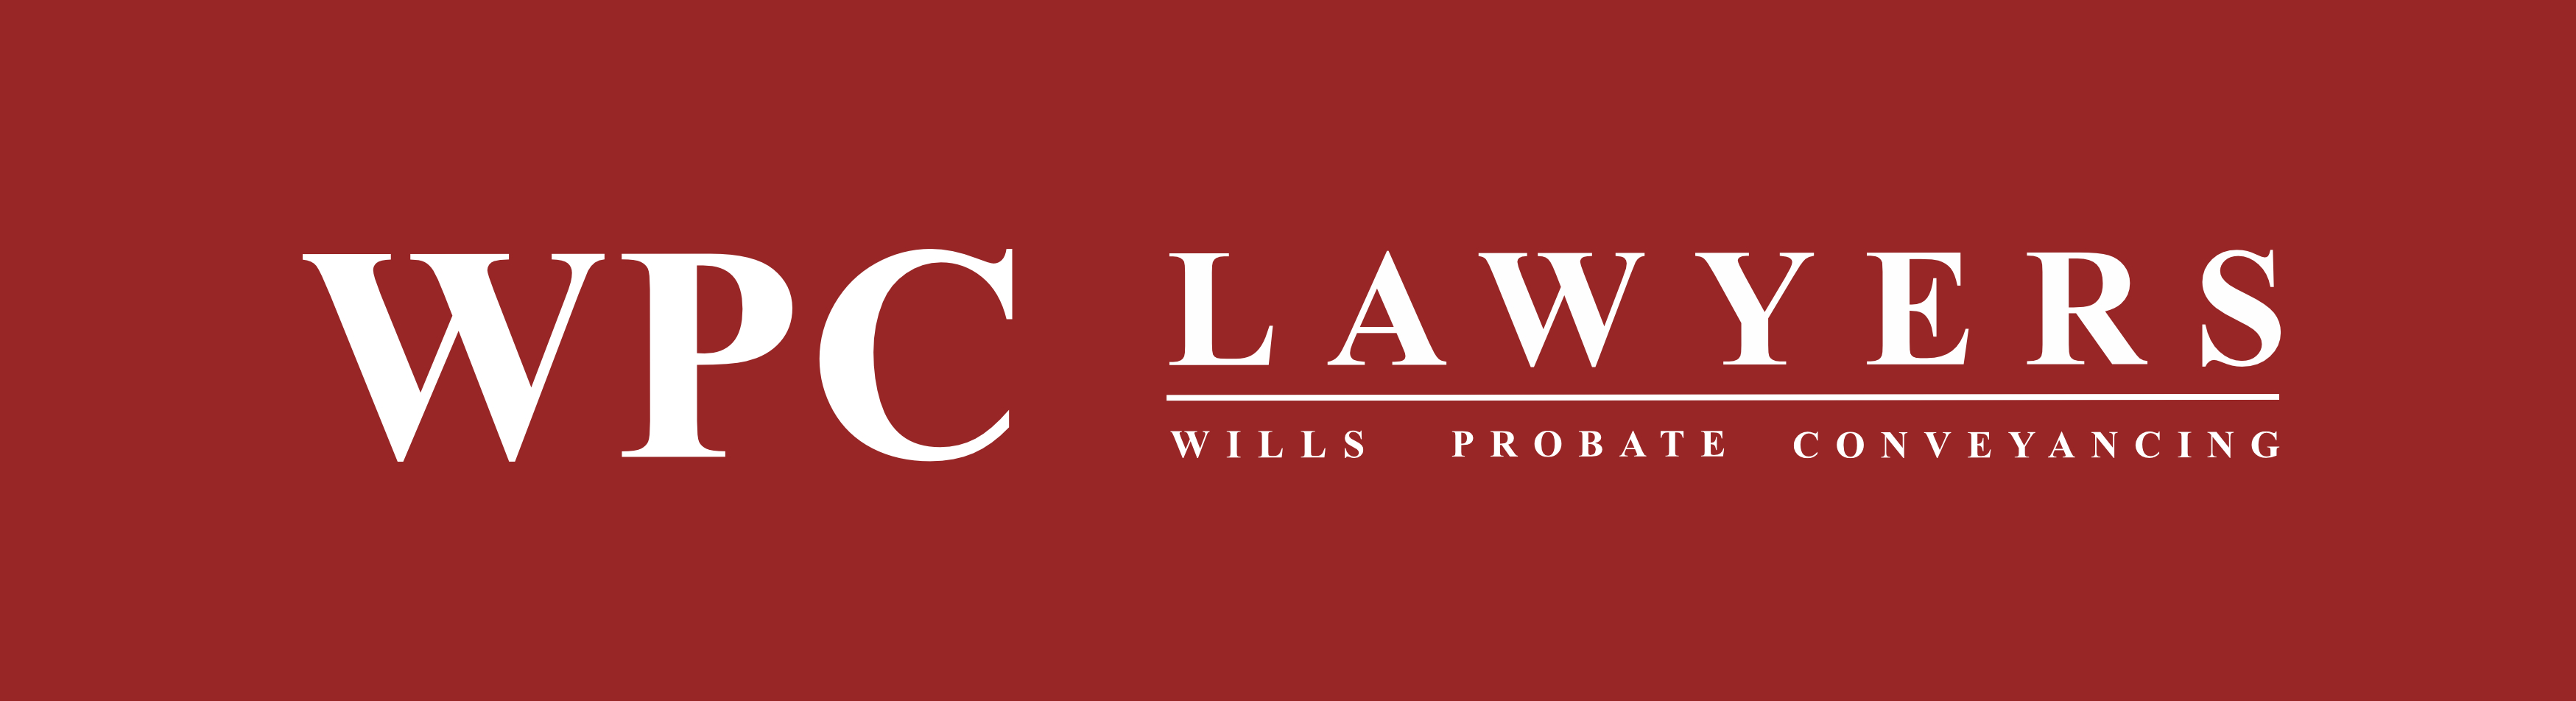 Company logo of WPC Lawyers - Wills, Probate & Conveyancing Lawyers - Melton Office